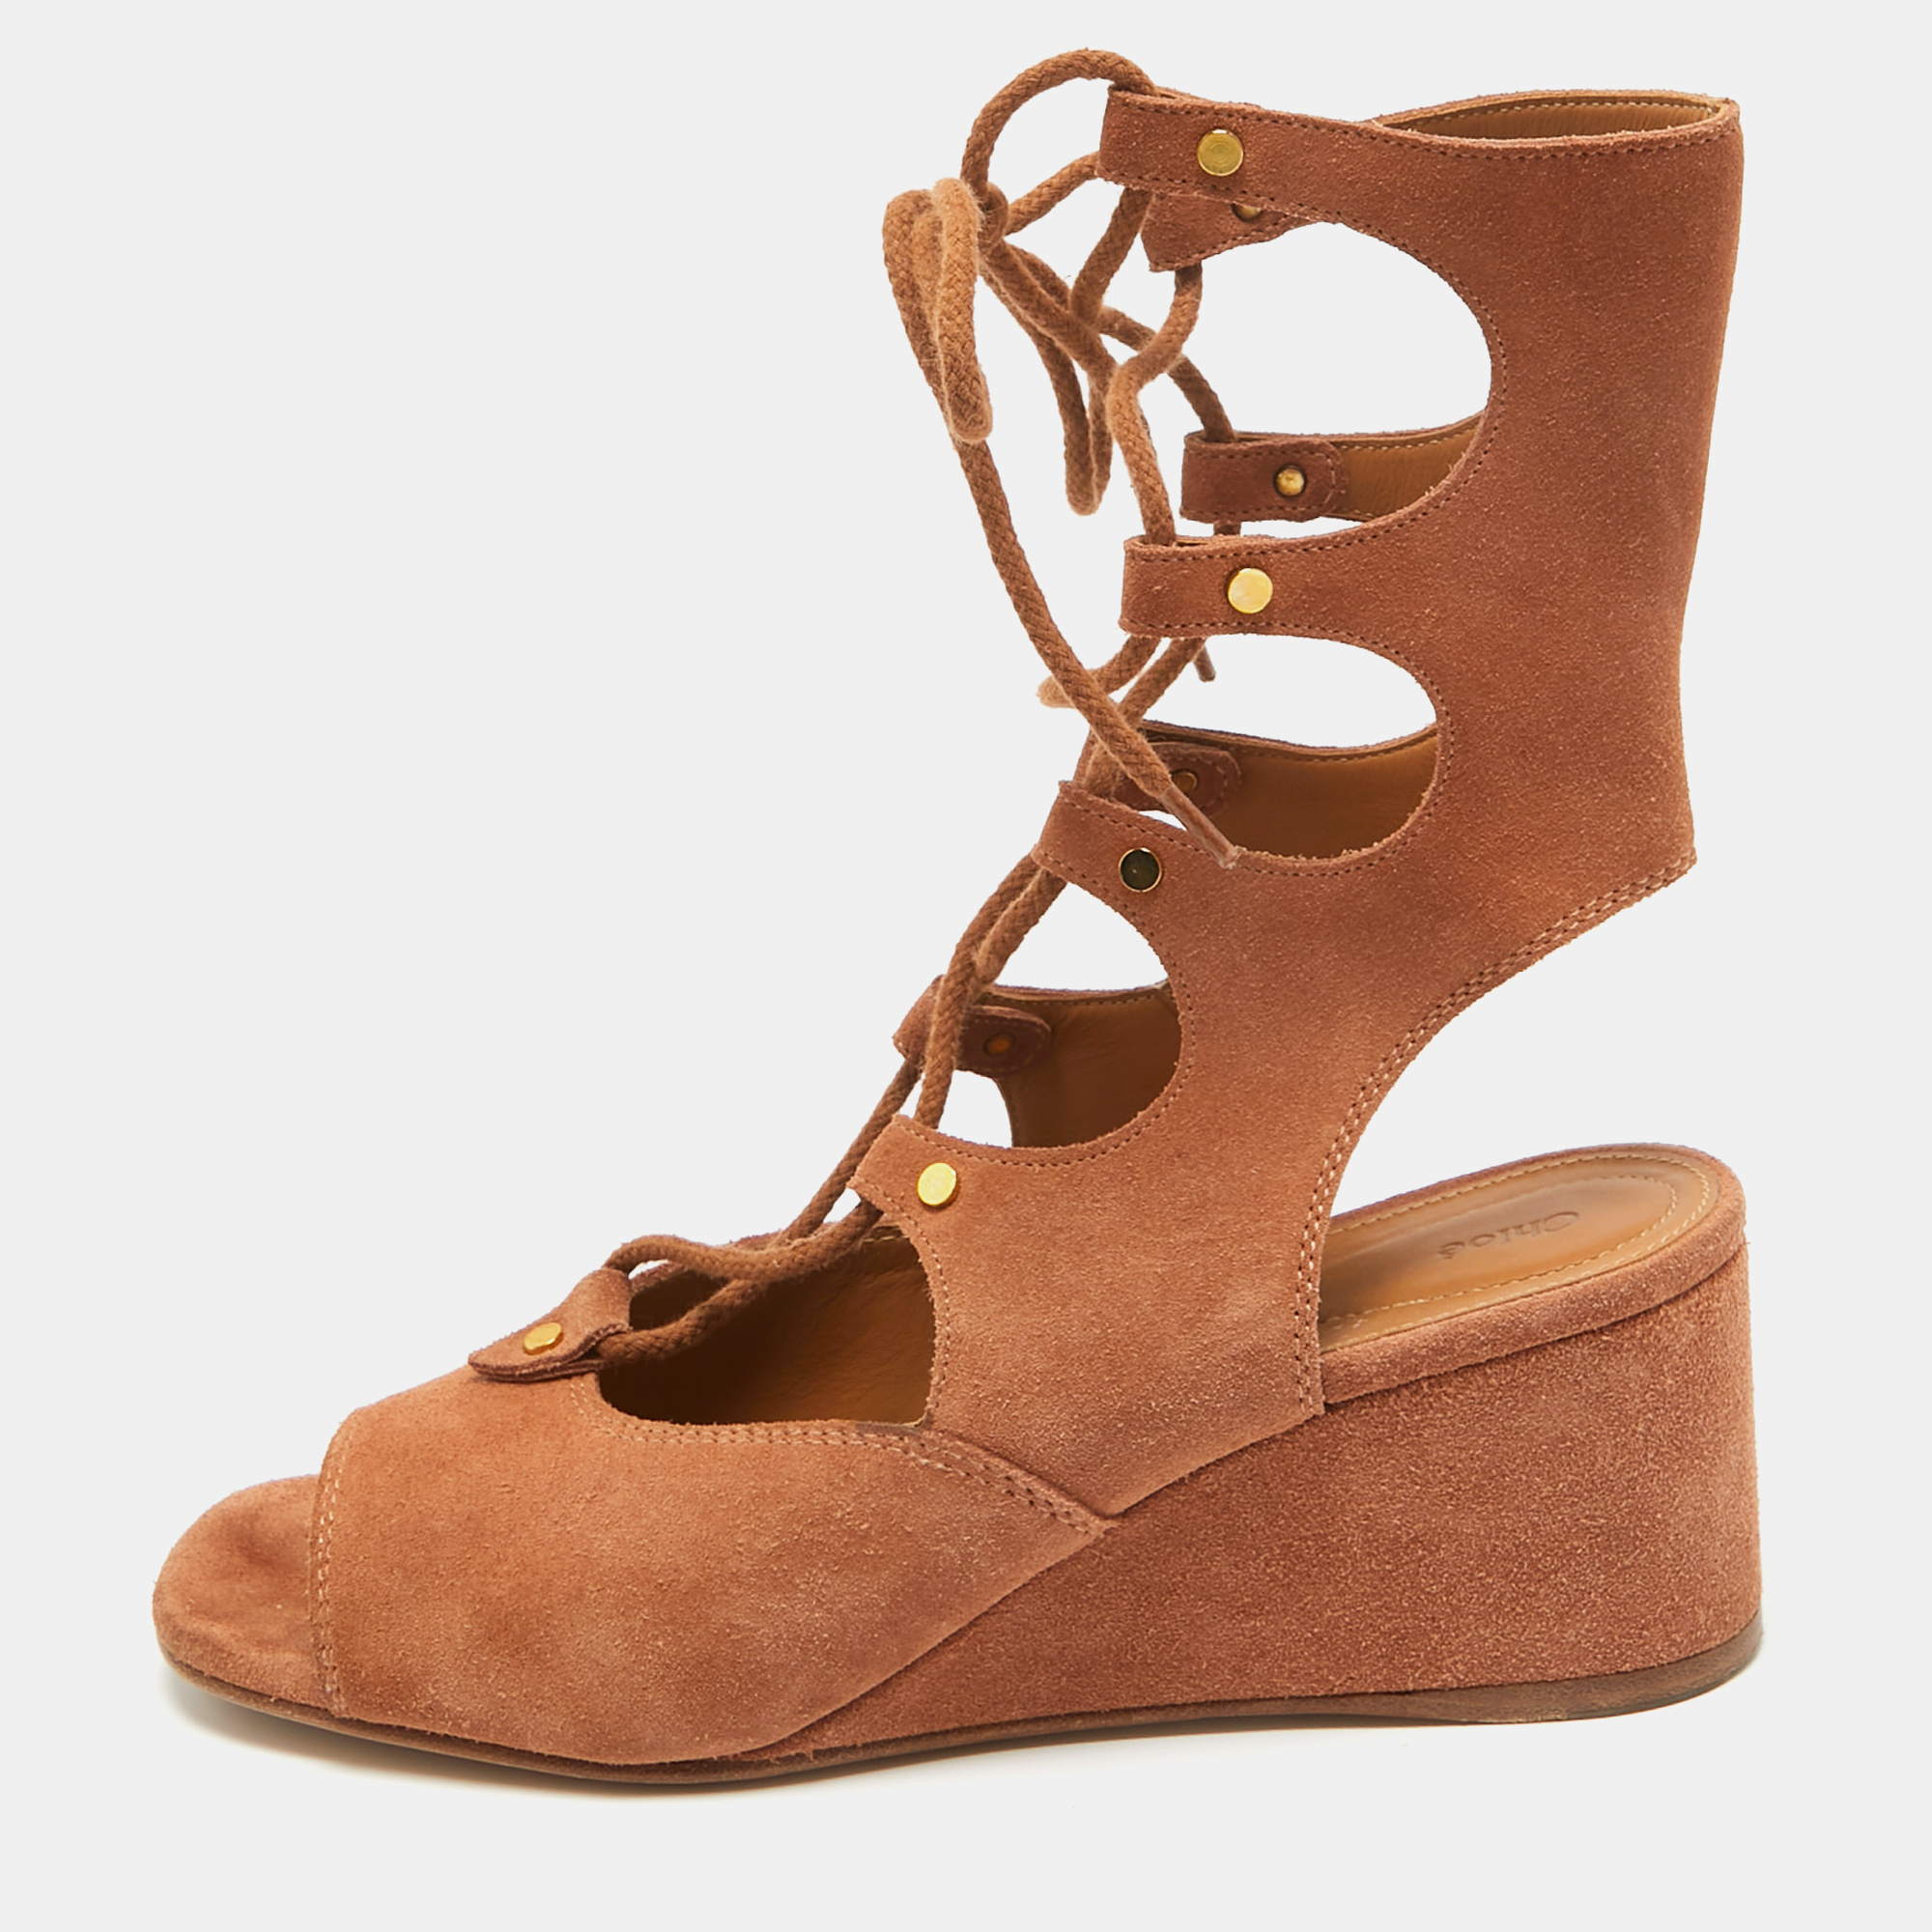 Chloe brown suede caged tie up ghillie wedge sandals size 39